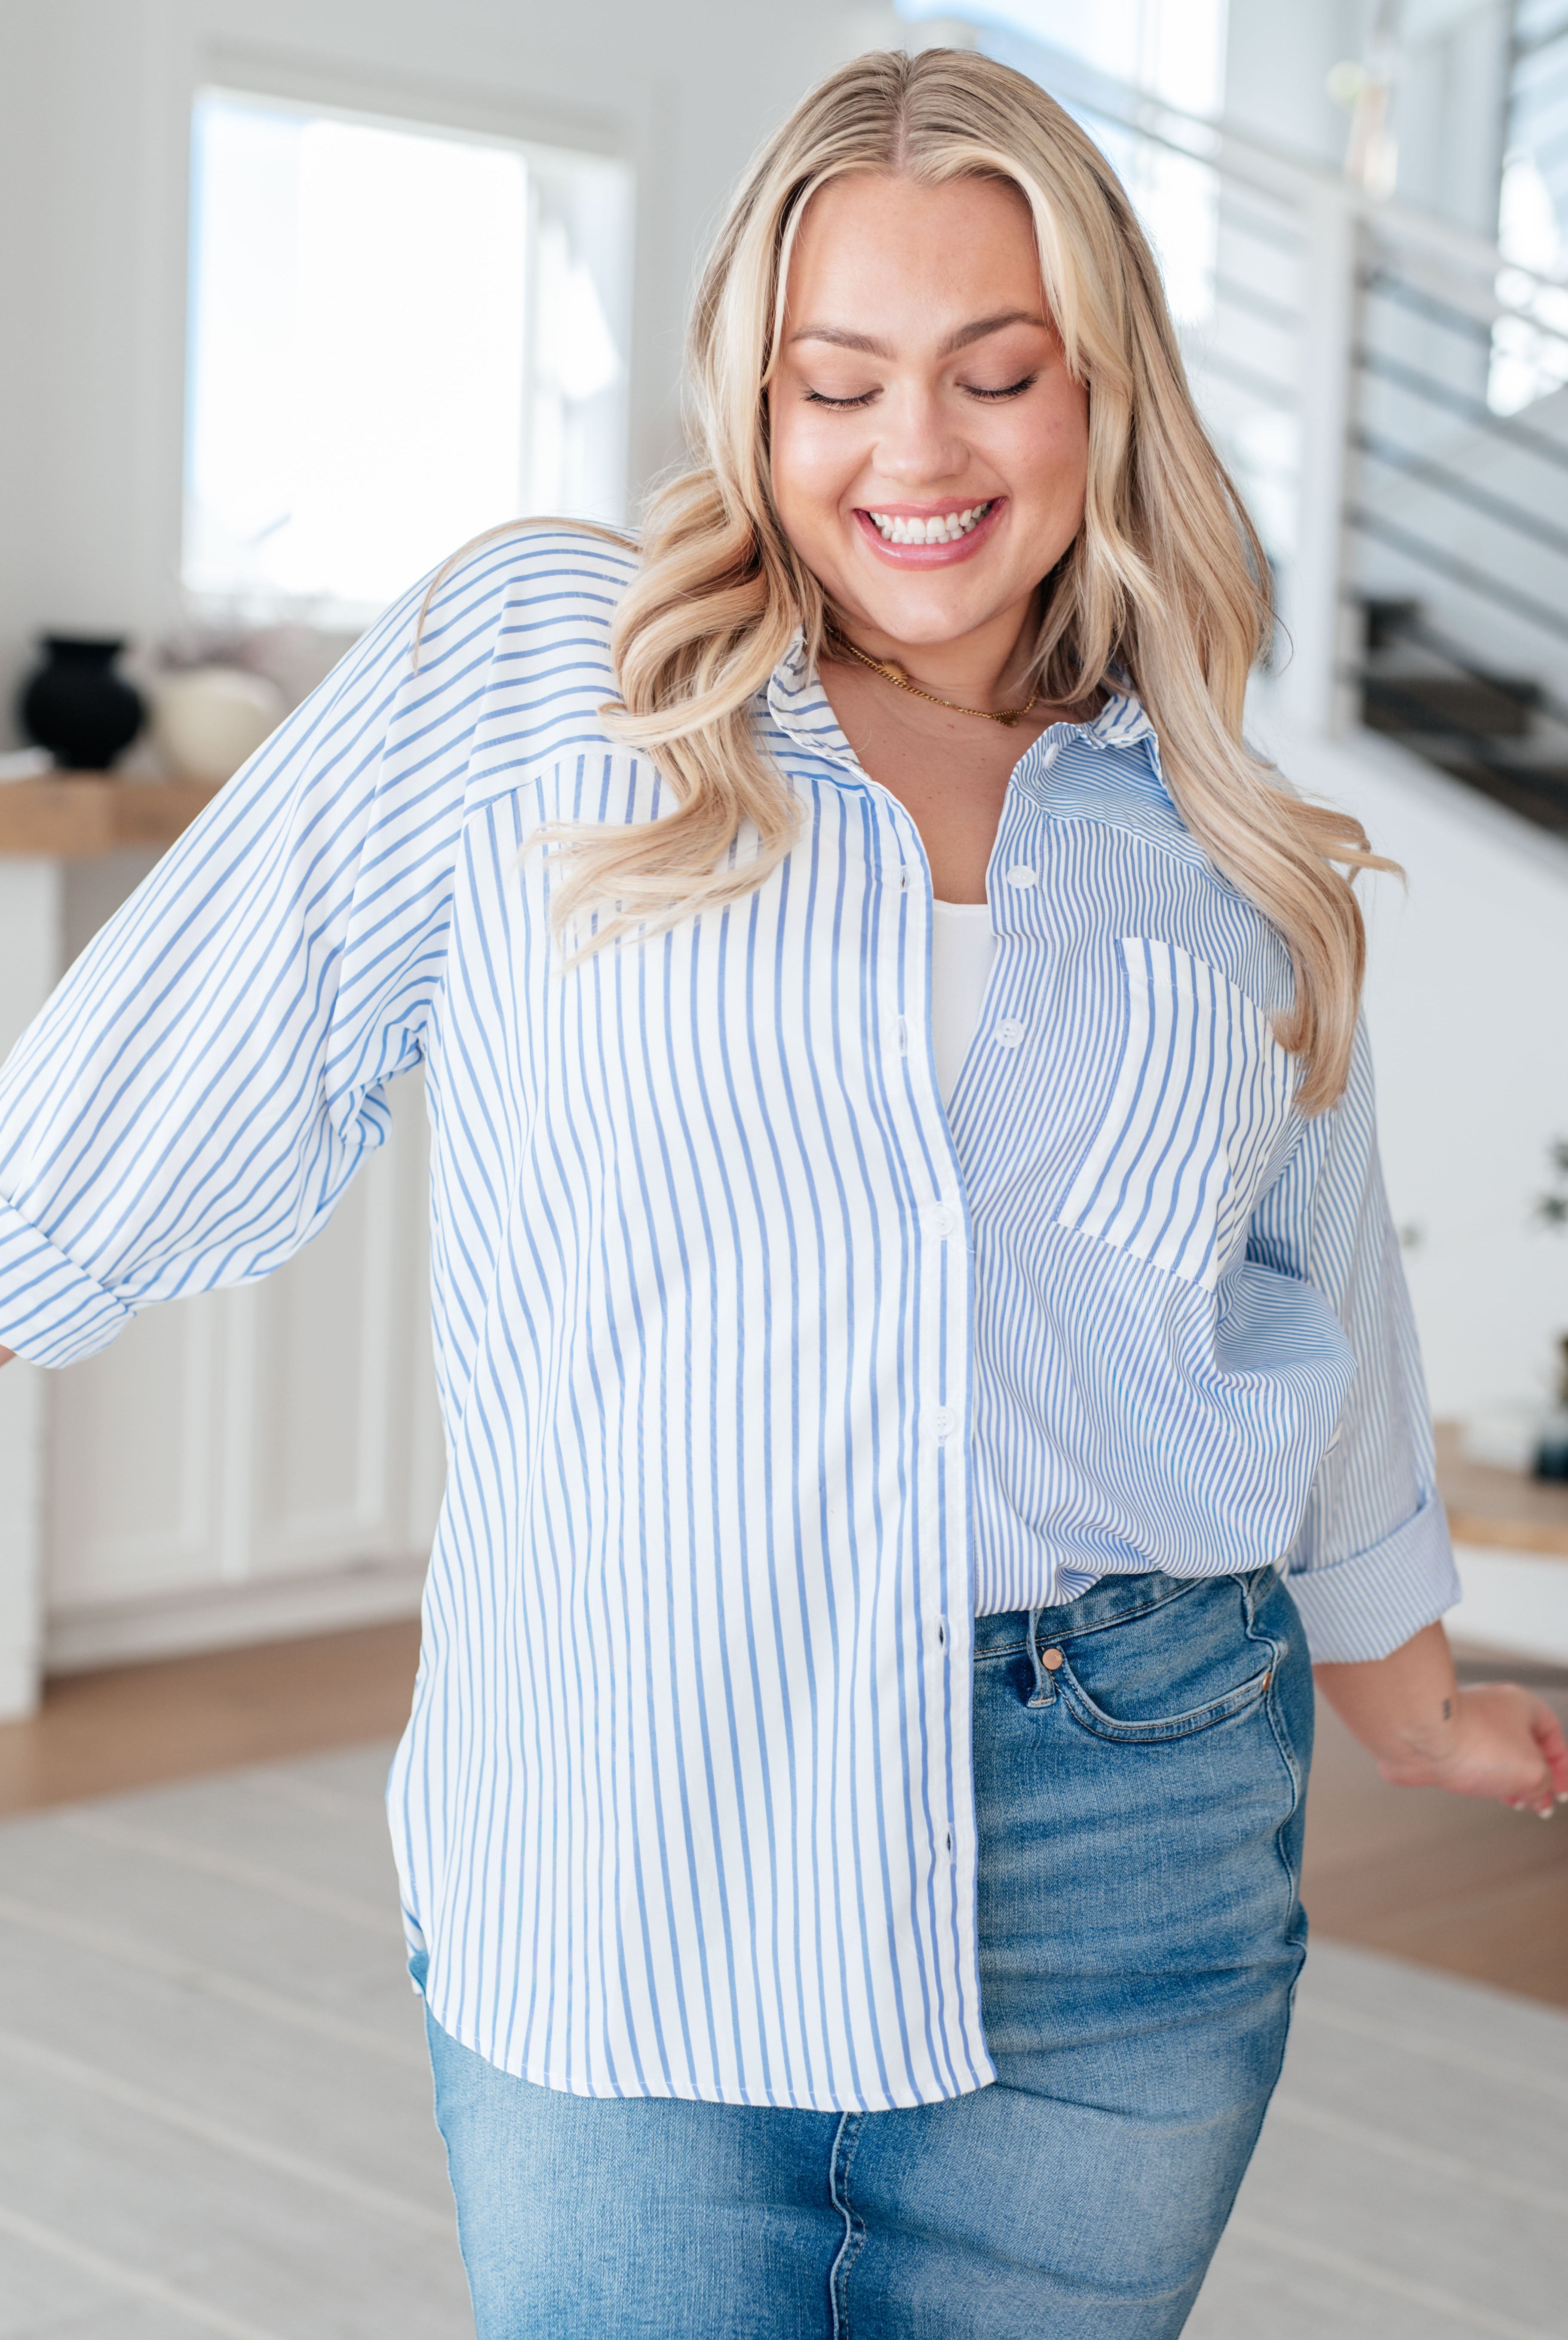 This or That Striped Button Down-Long Sleeves-Ave Shops-Urban Threadz Boutique, Women's Fashion Boutique in Saugatuck, MI